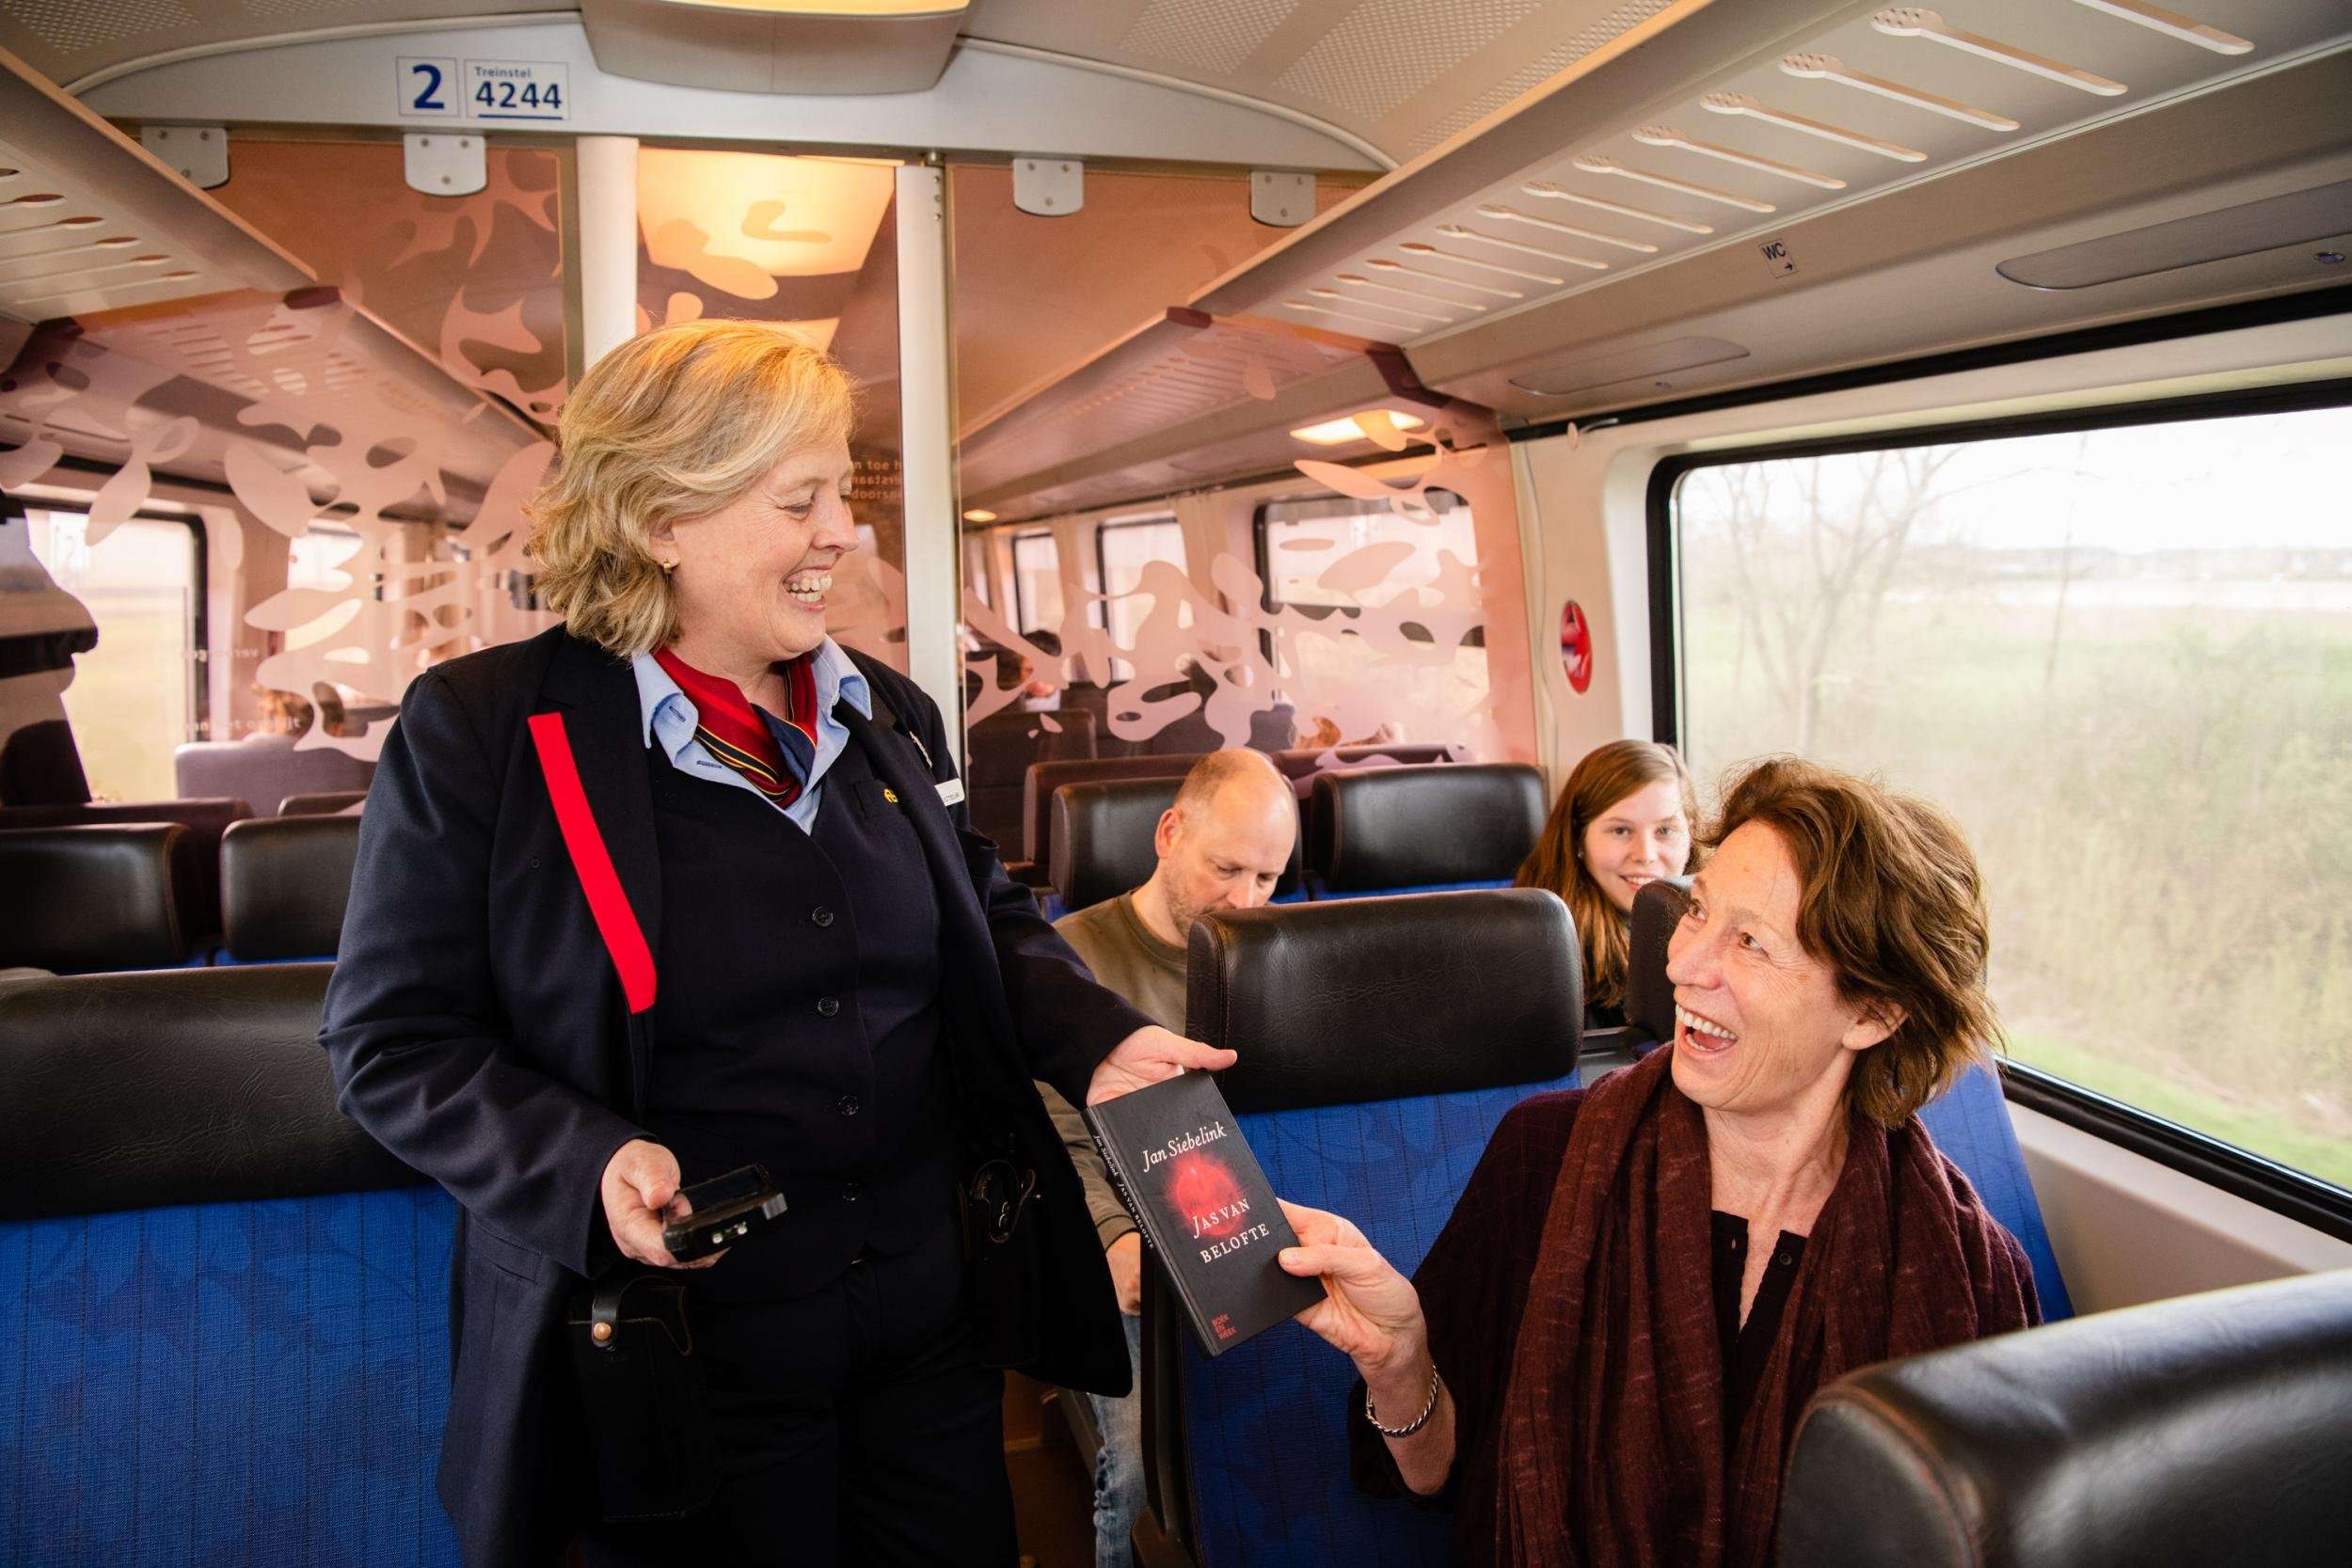 image for Netherlands makes trains free on national book day for those who show a book instead of ticket